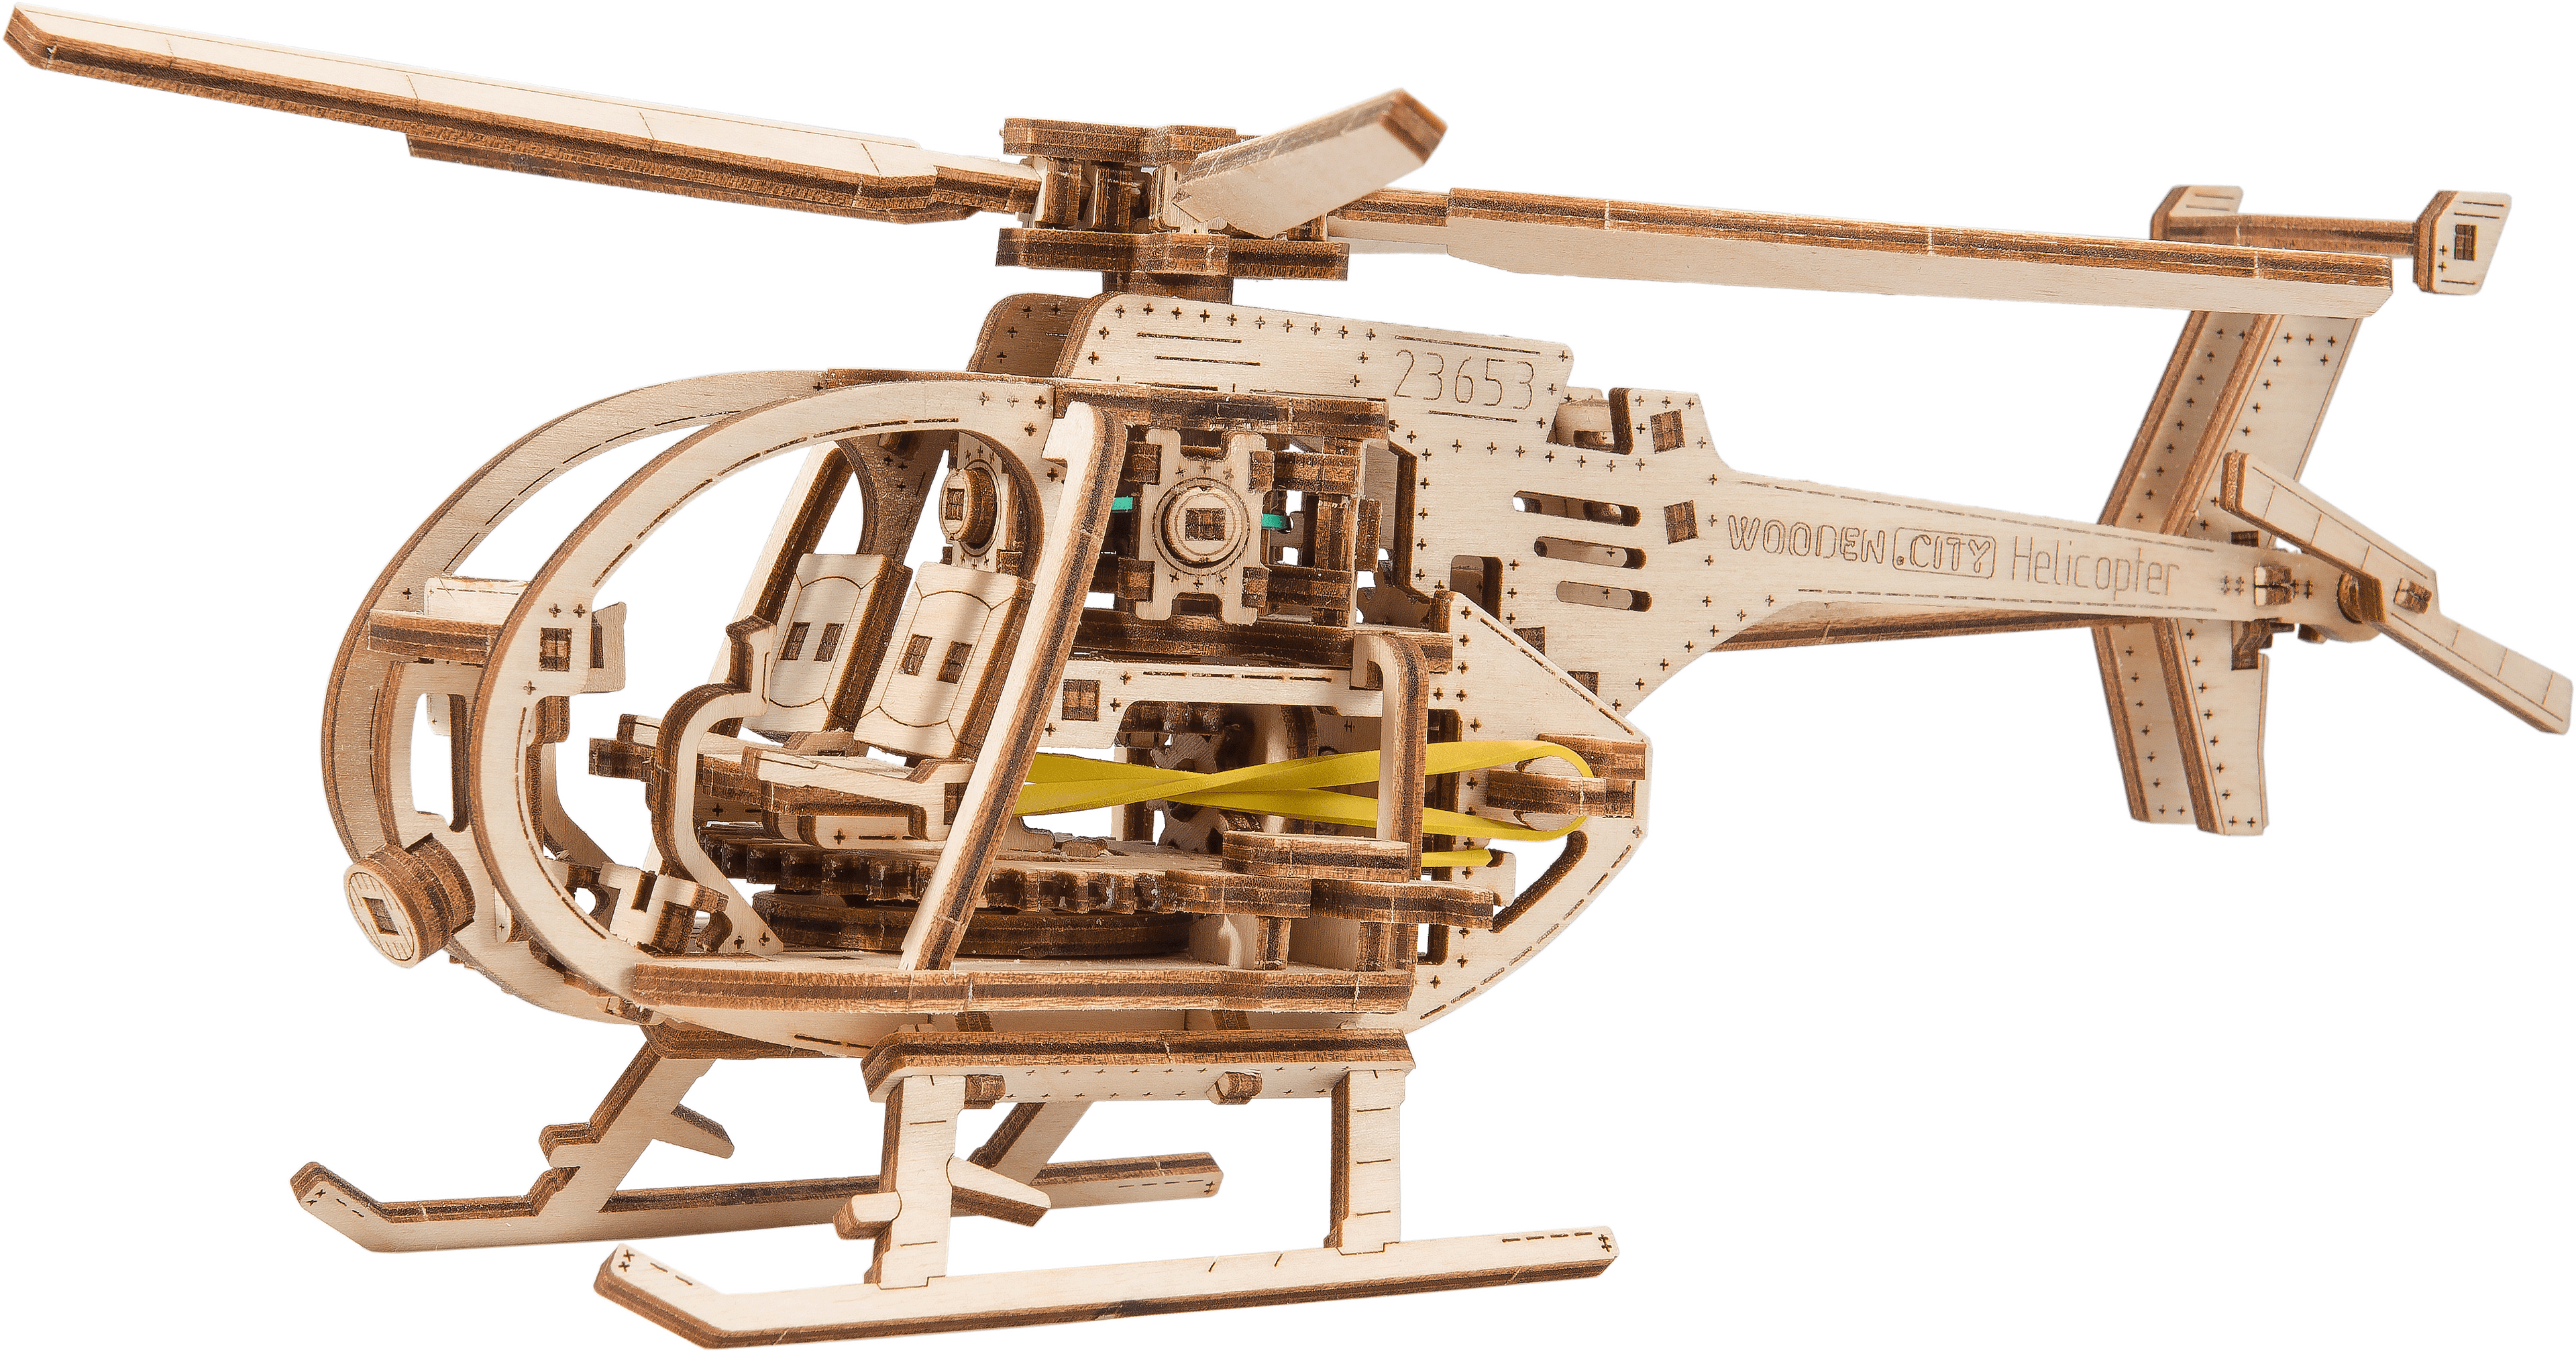 Wooden 3D Puzzle - Helicopter